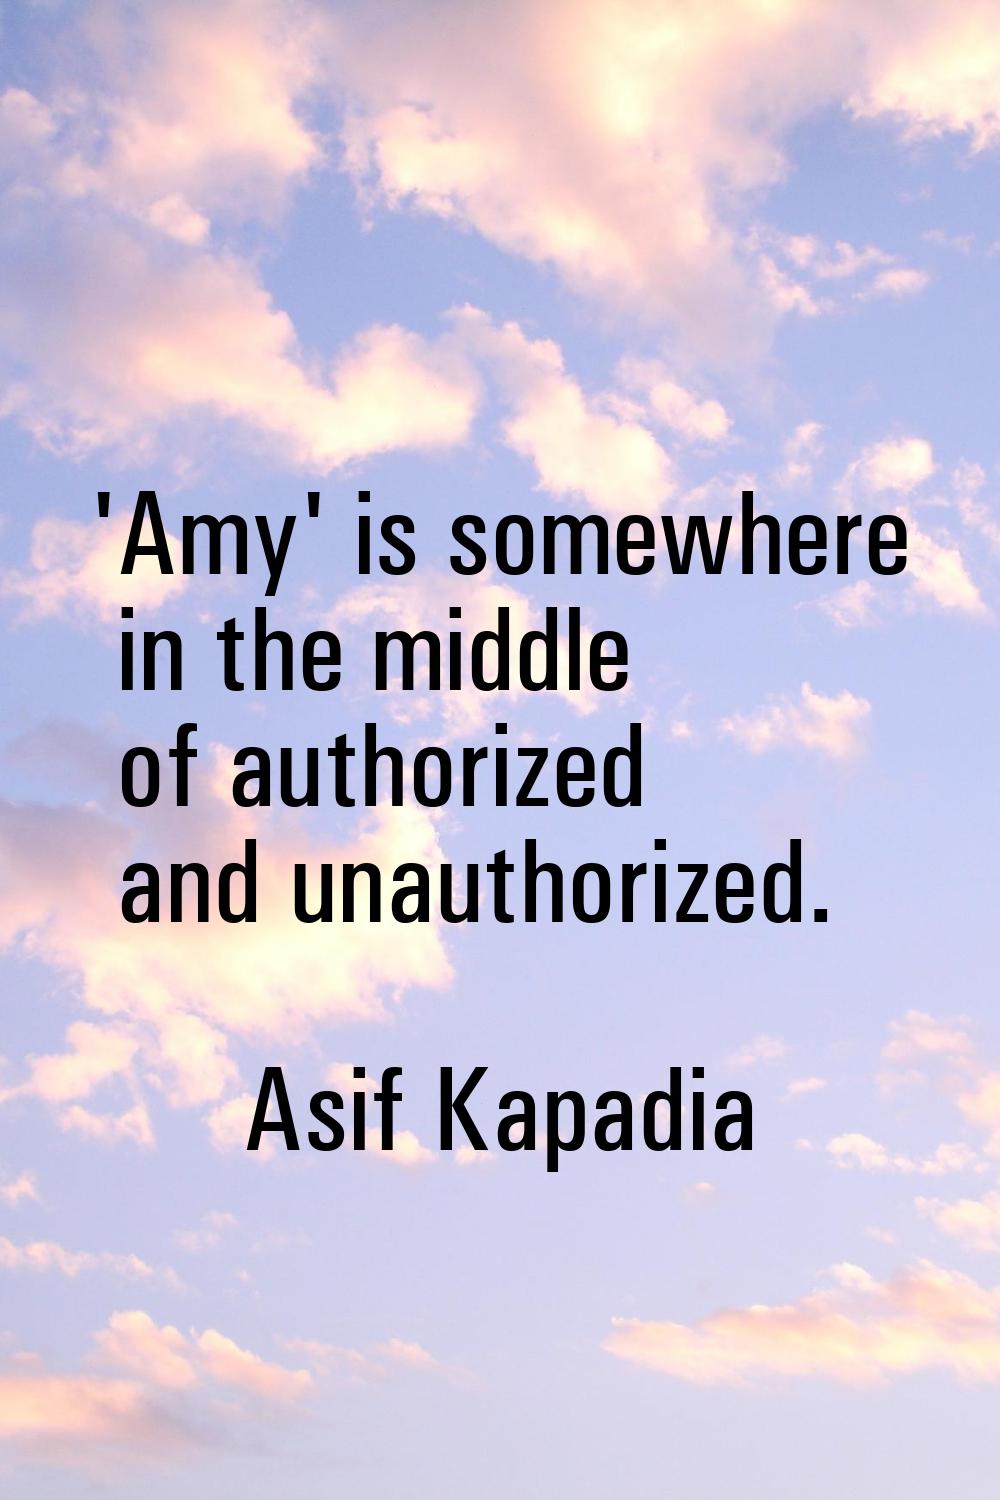 'Amy' is somewhere in the middle of authorized and unauthorized.